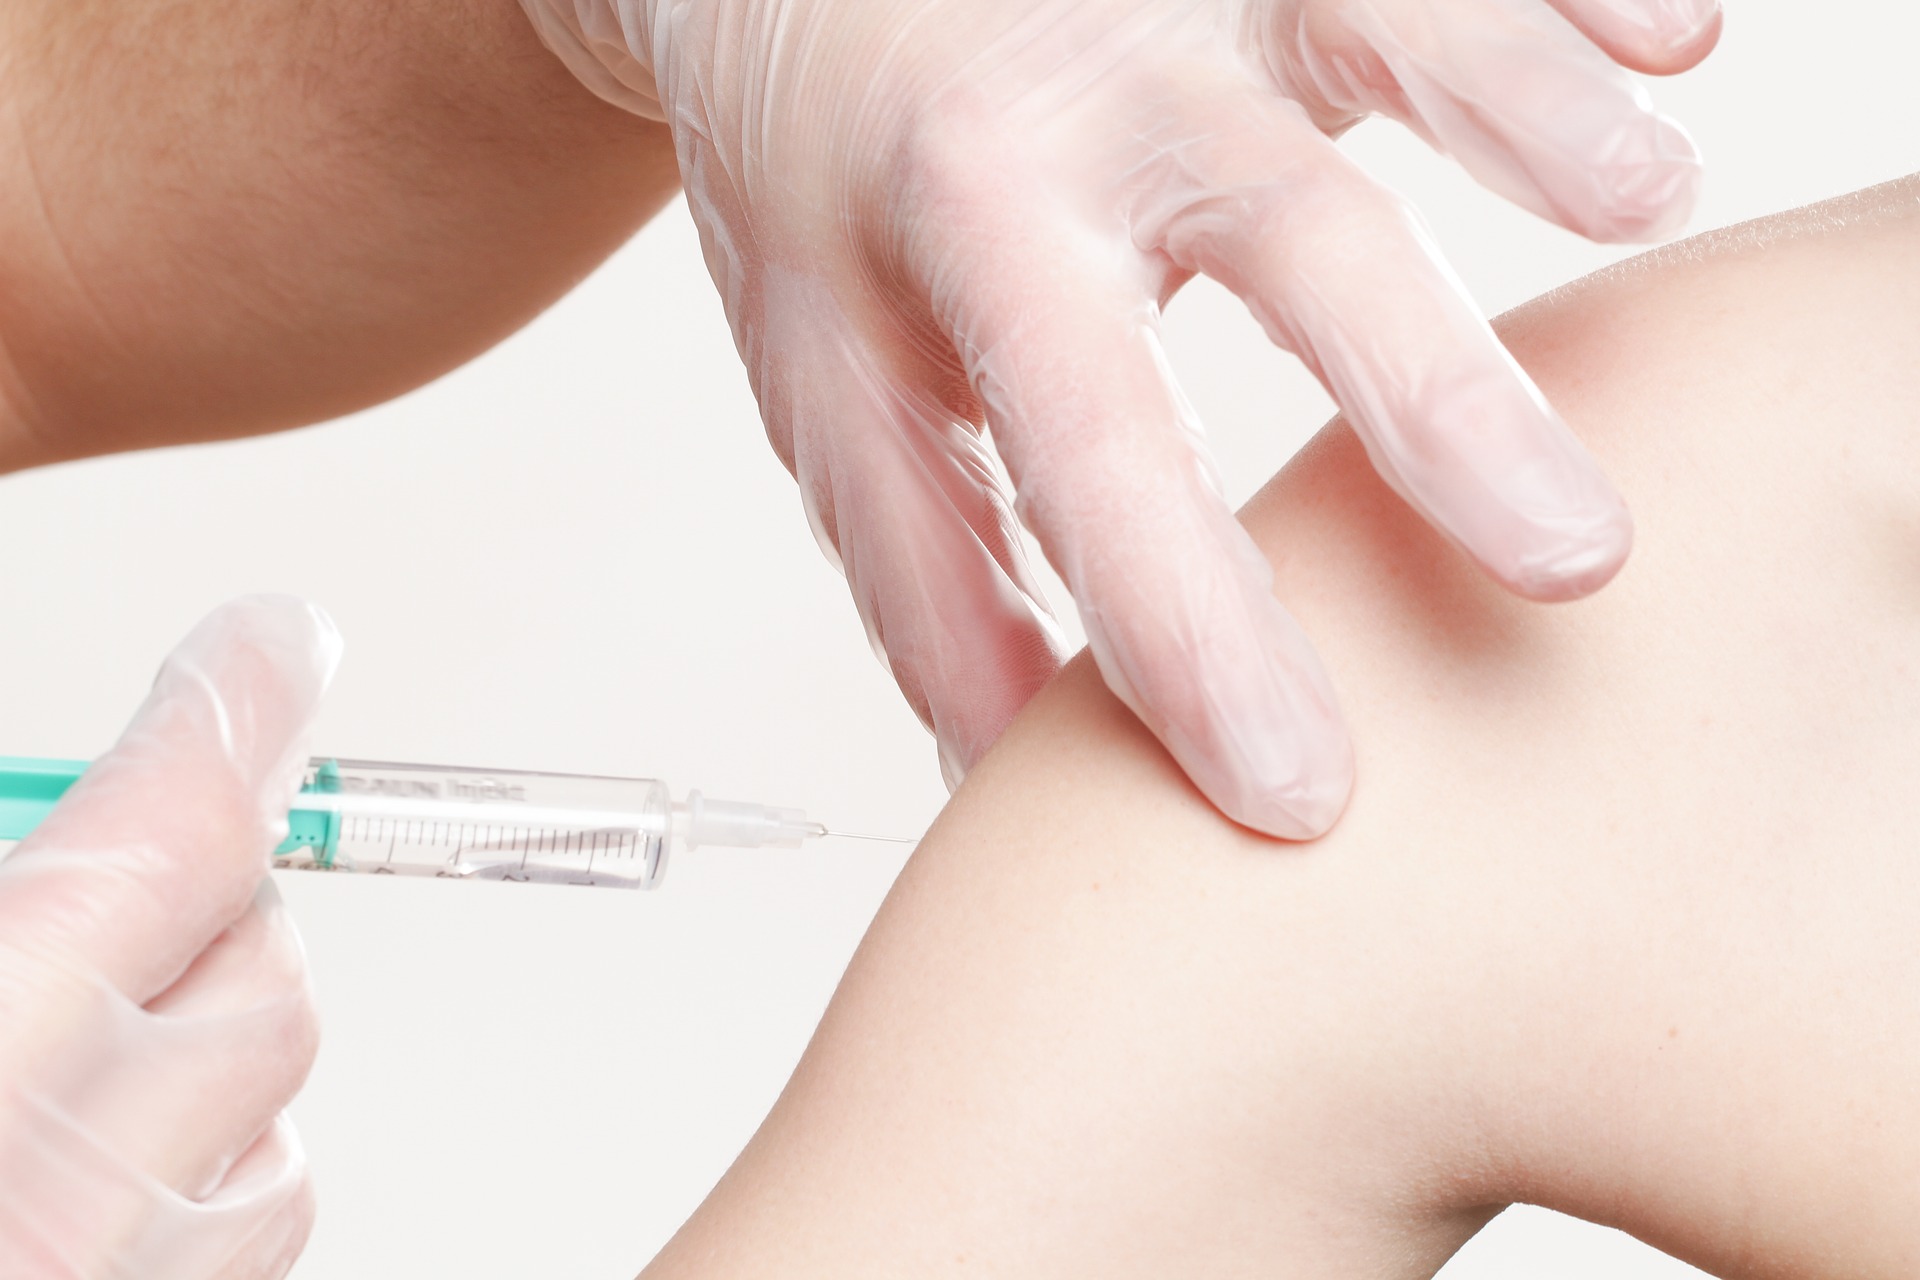 COVID-19 – Thousands of Saudi residents to get shot at vaccination centers